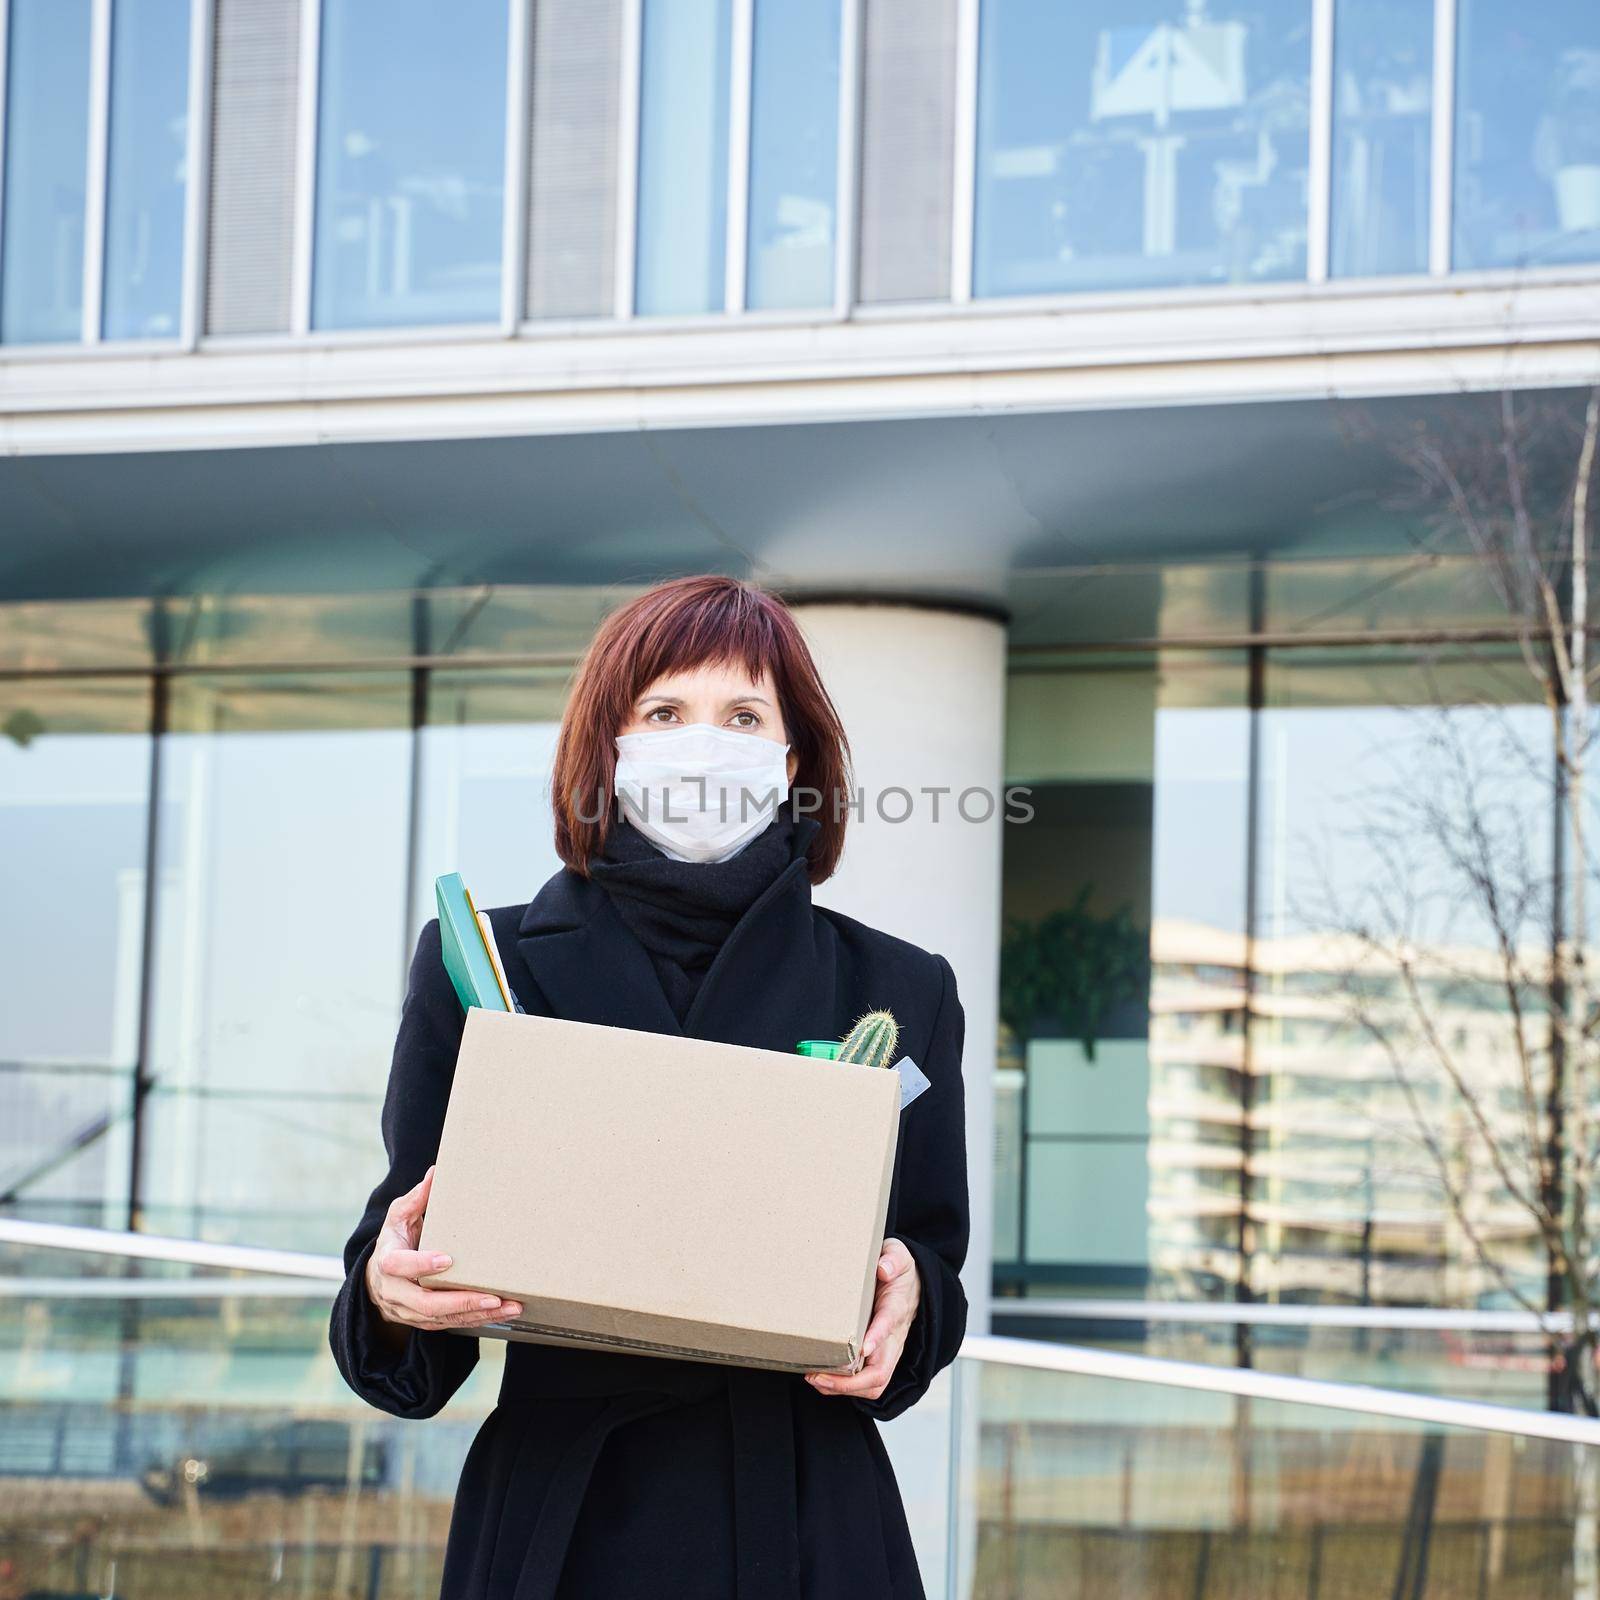 Concept of job loss due to the COVID-19 virus pandemic. Woman in mask lost job because of coronavirus. Female with box of his things against background of business center